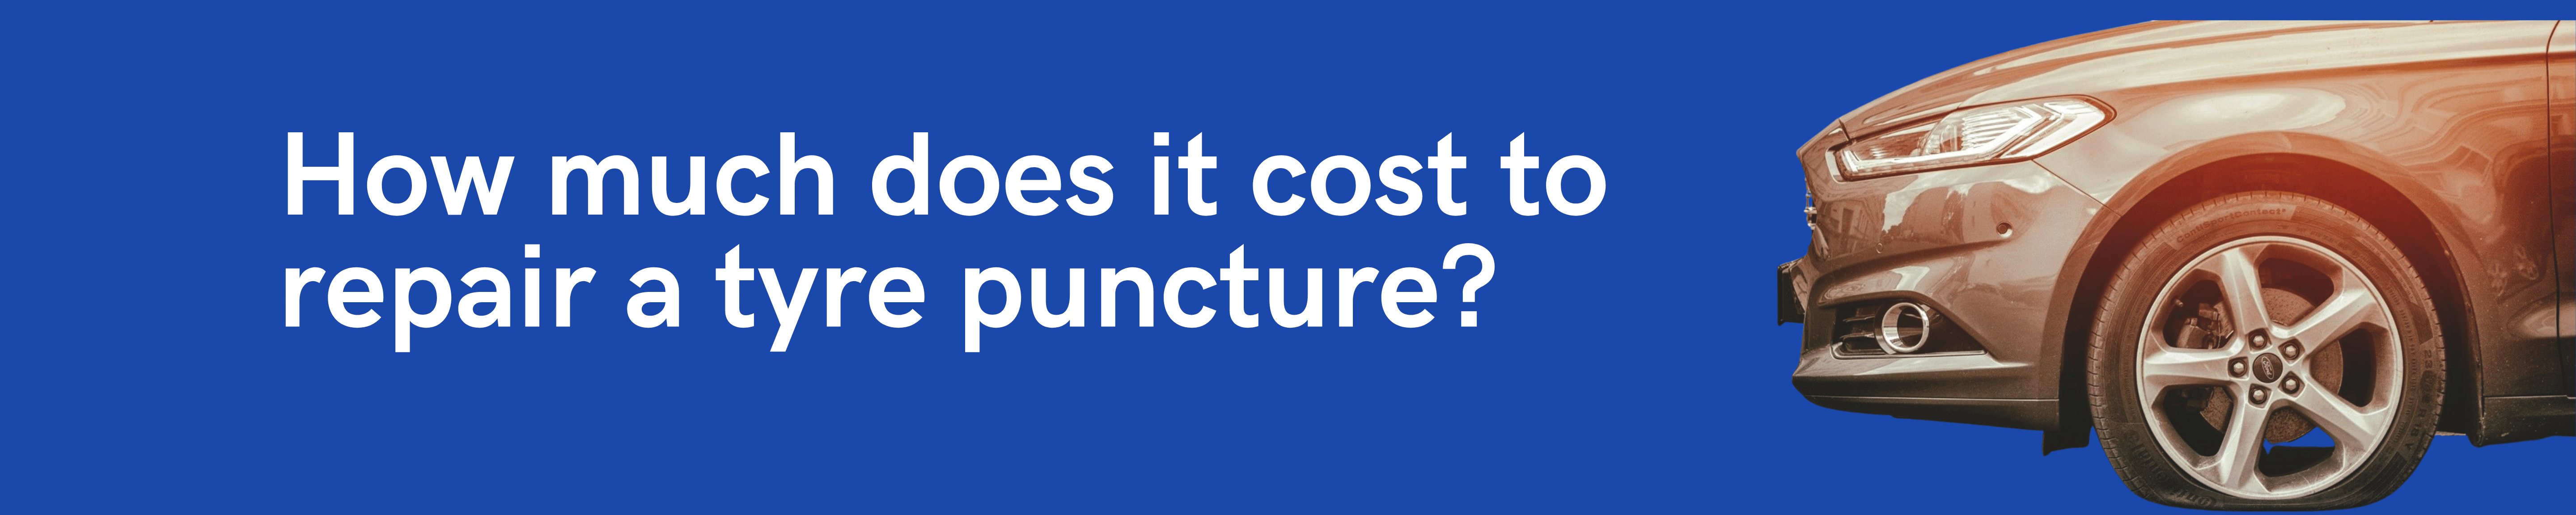 How much does it cost to repair a tyre puncture?